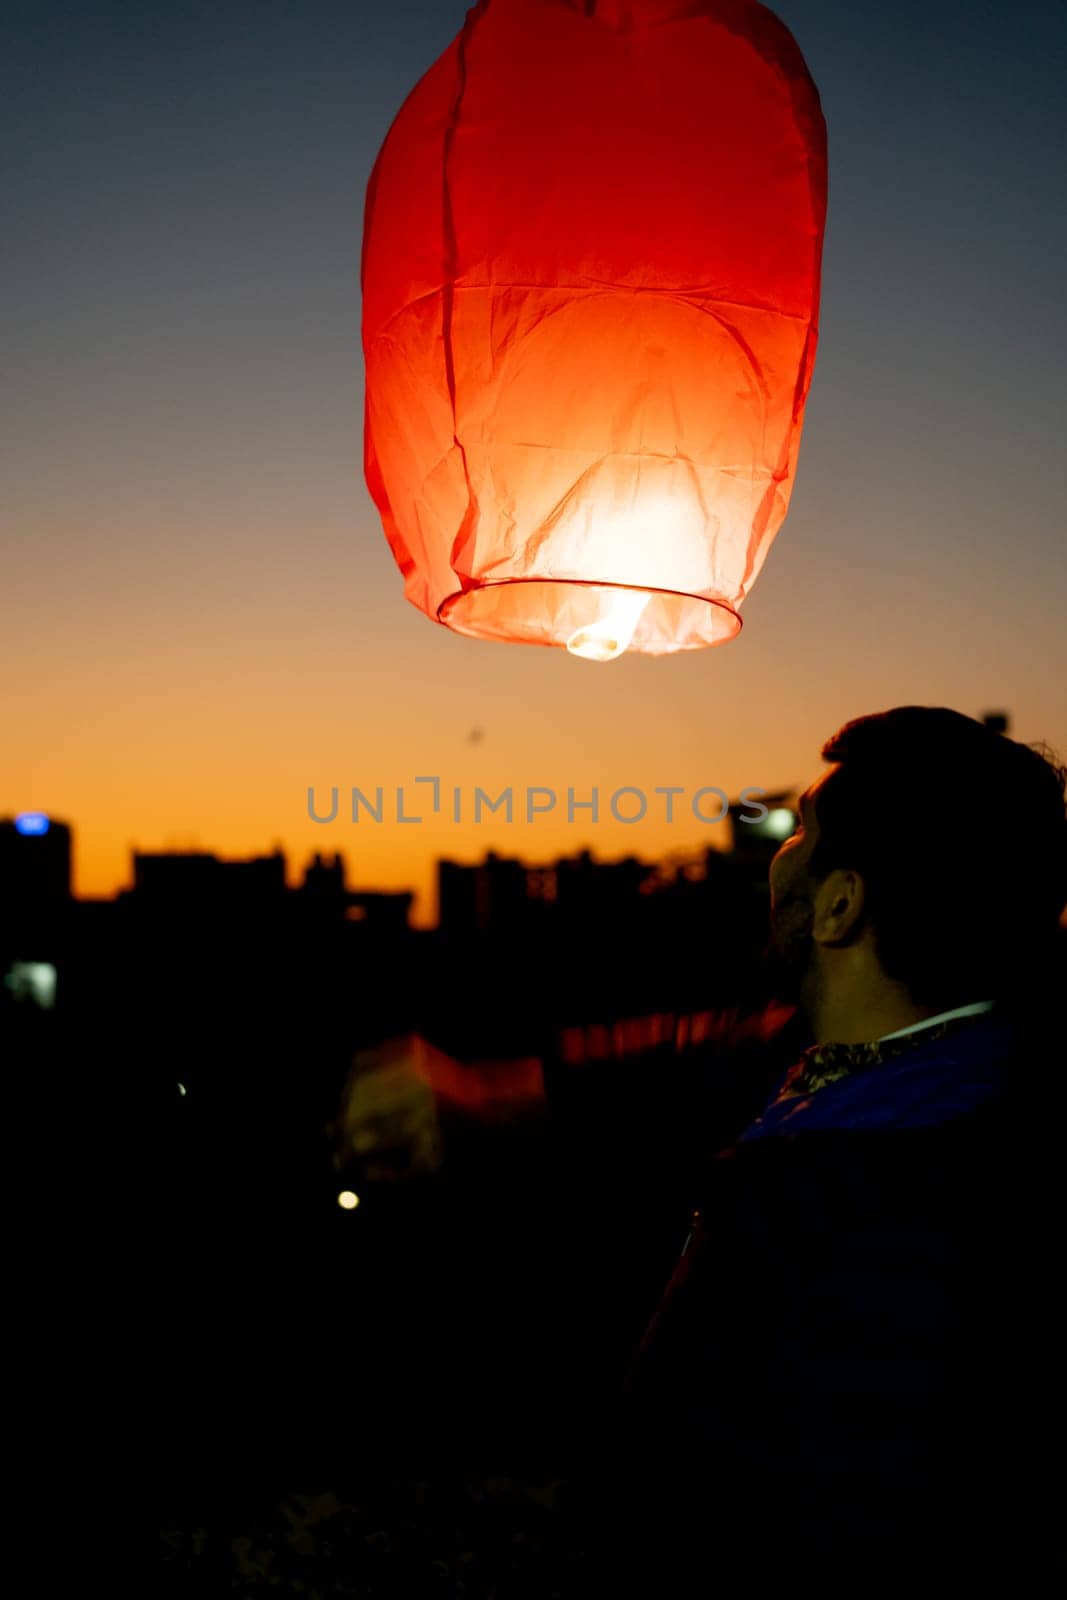 silhouette of man pushing up paper sky lantern with flame at bottom at sunset on sankranti uttarayan, independence day by Shalinimathur